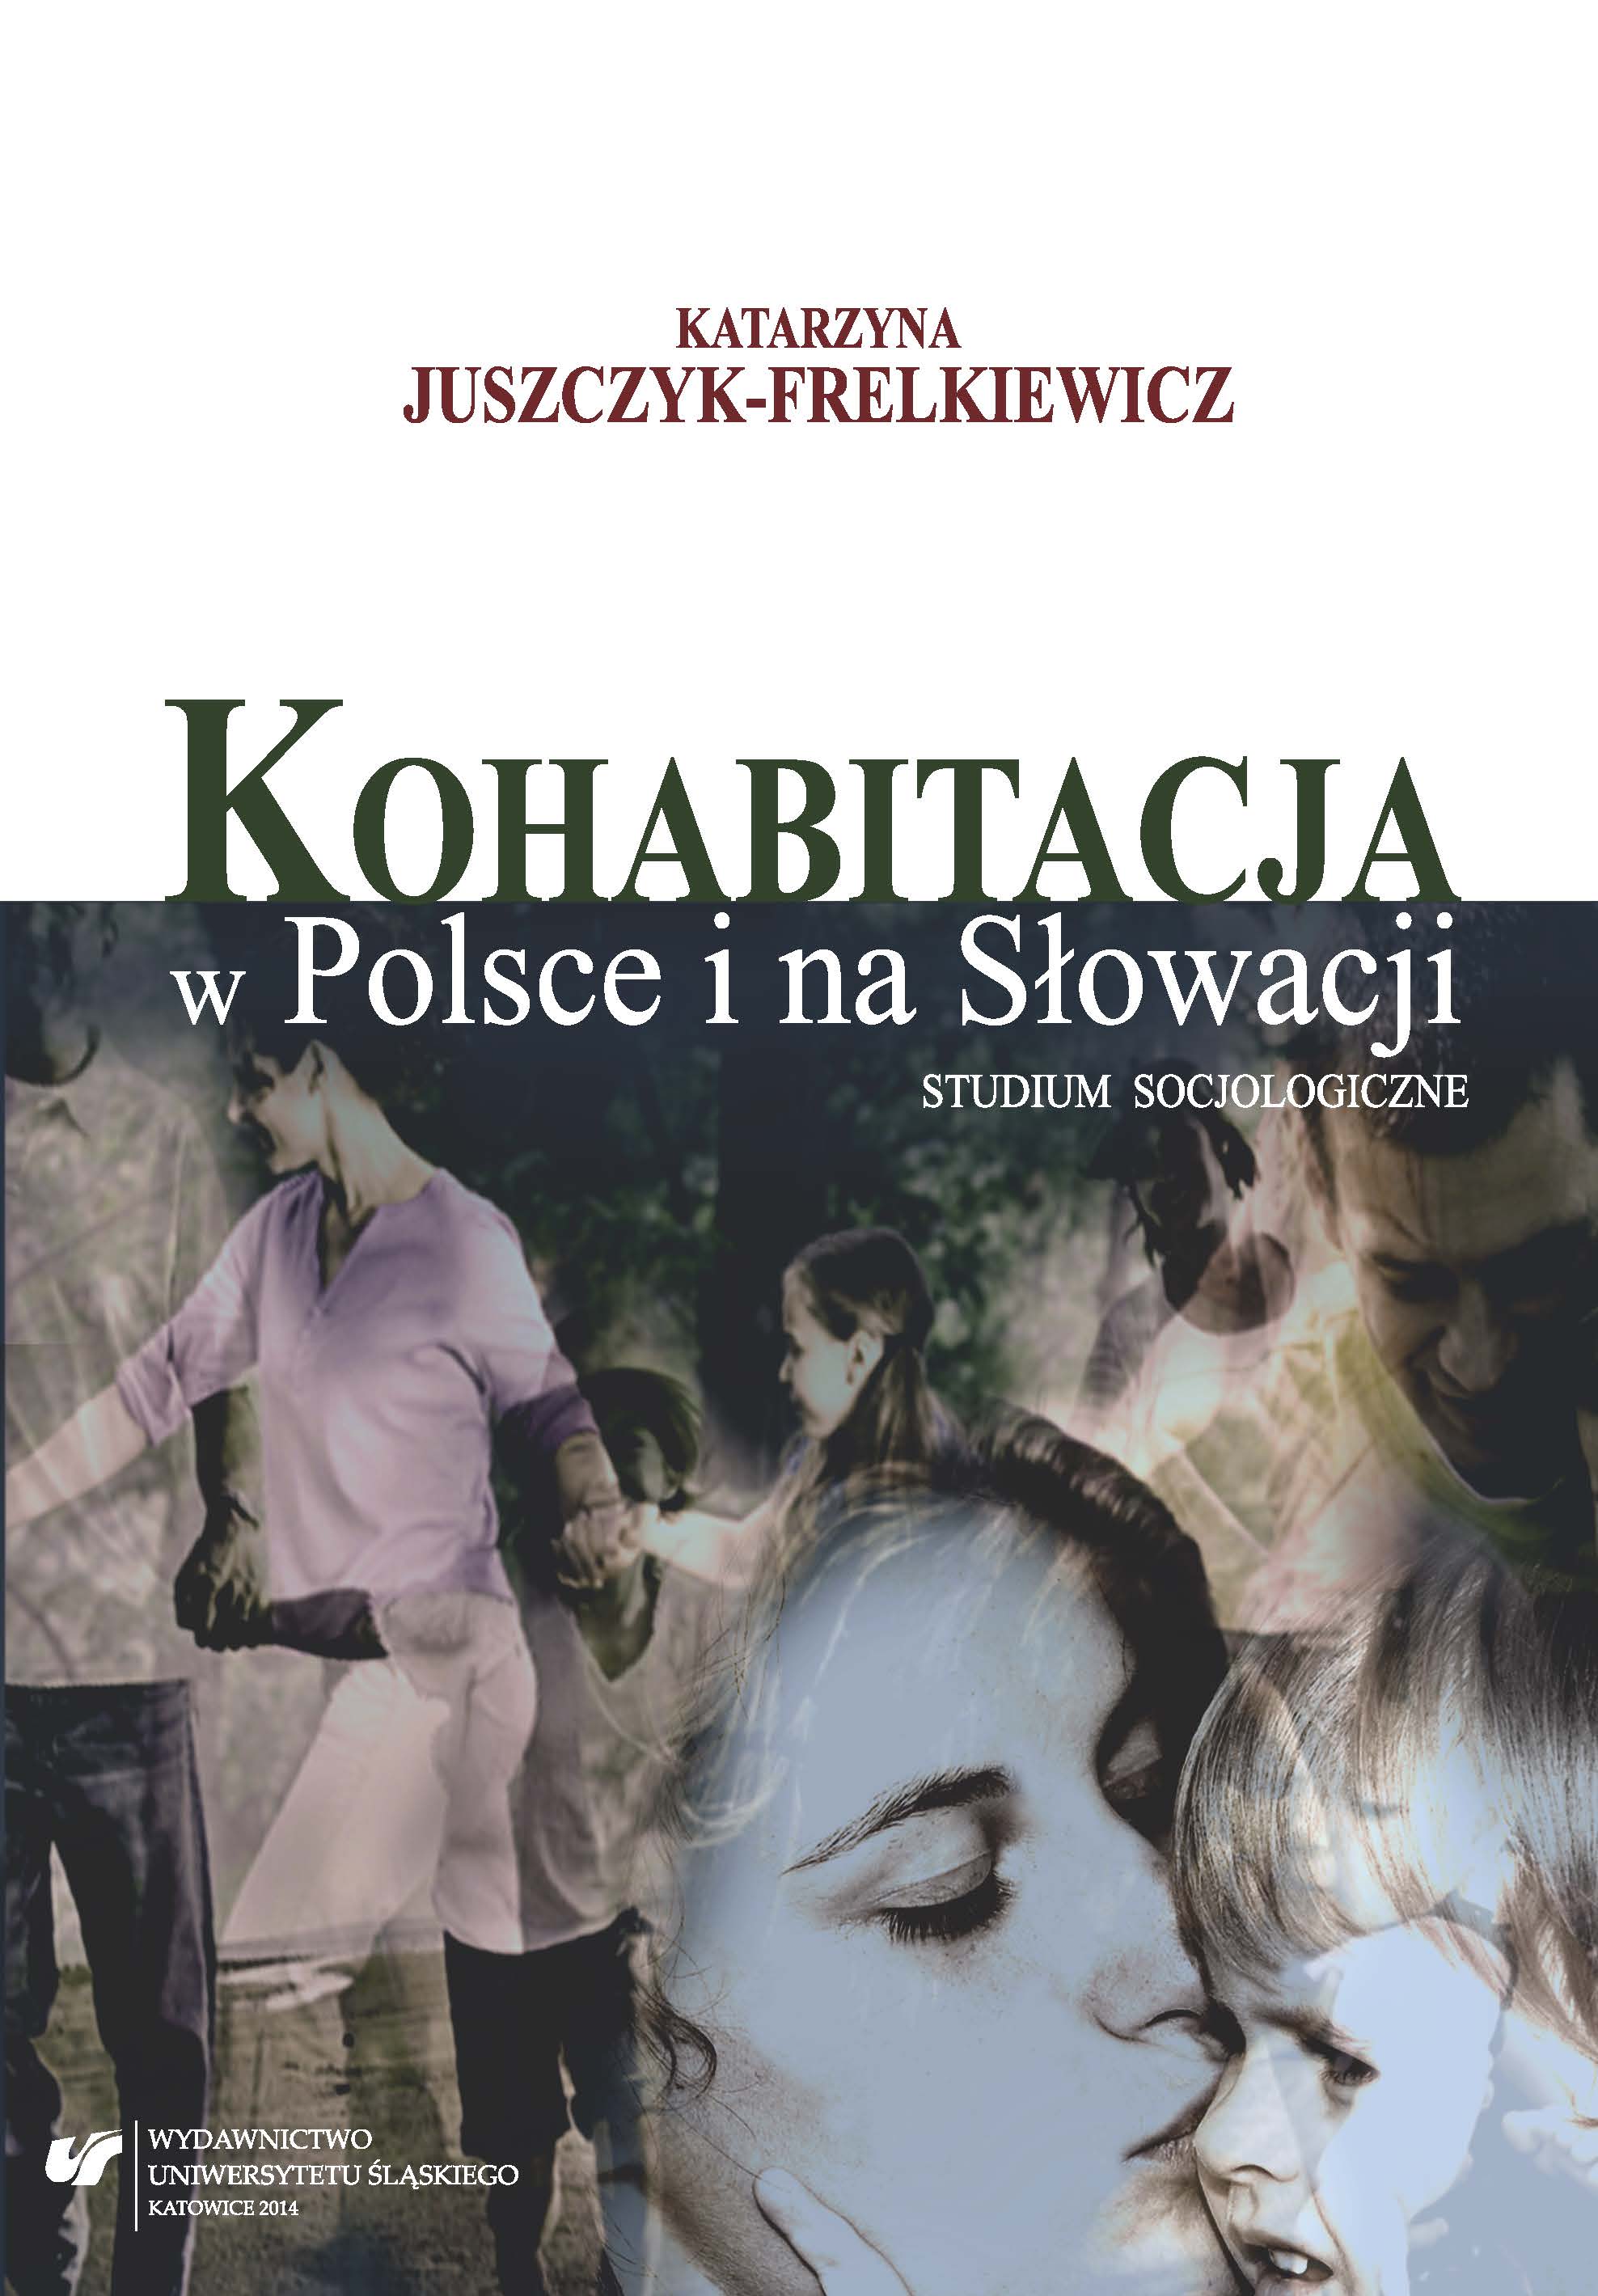 Cohabitation in Poland and Slovak Republic. A Sociological Study Cover Image